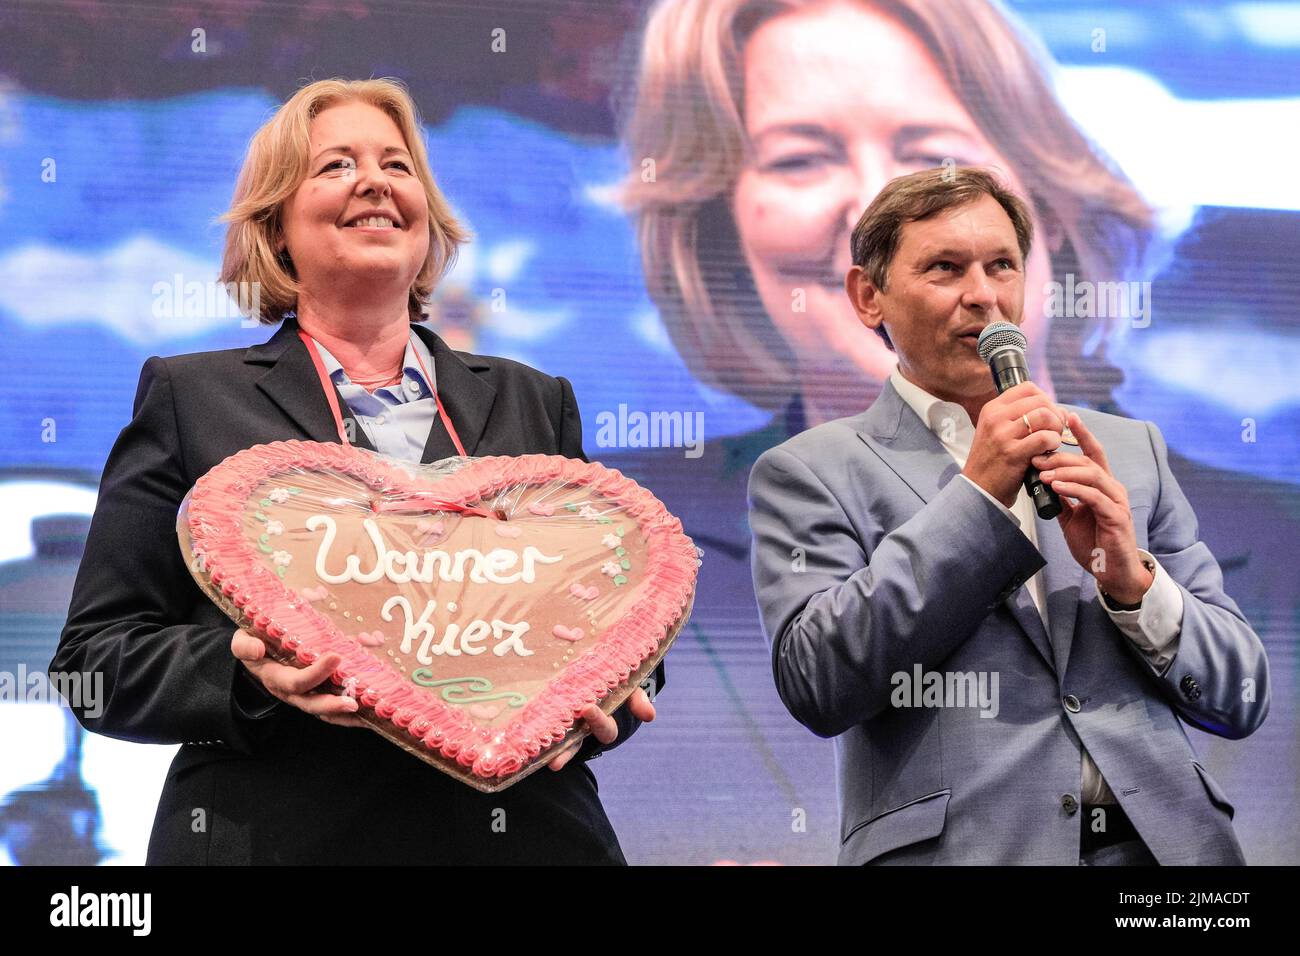 Crange, Herne, NRW, 05th Aug July, 2022. Mayor of Herne Dr. Frank Dudda hands Bundestagspräsidentin (President of the German Parliament), Bärbel Bas (SPD) a 'Wanner Kiez' heart. The official opening ceremony of the 2022 Cranger Kirmes, Germany's 3rd largest funfair and the largest of its kind in NRW, is attended by invited guests in the festival tent and beer hall. The popular fair, which was paused during the pandemic, regularly attracts more than 4m visitors during its 10 day run and has been established for decades. Credit: Imageplotter/Alamy Live News Stock Photo